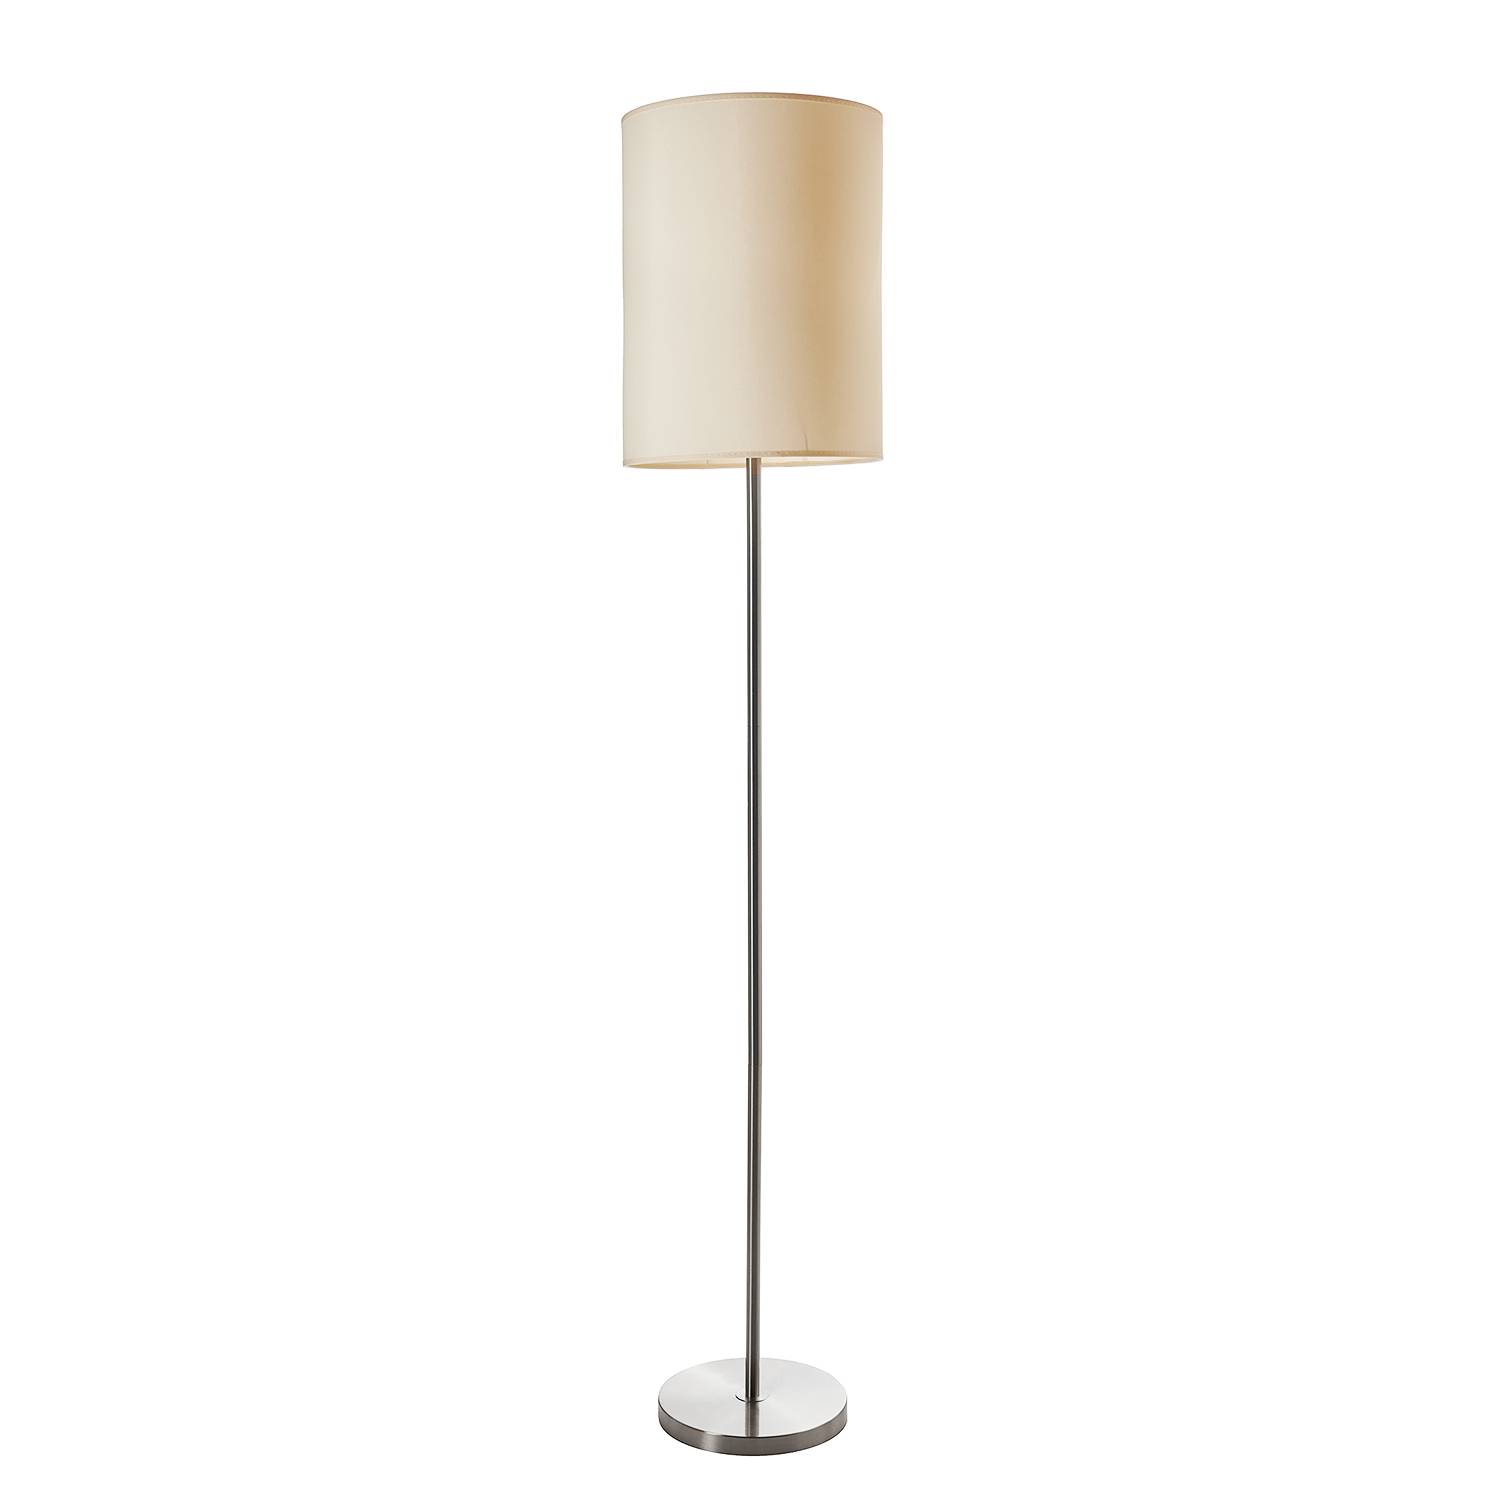 Image of Lampadaire Combiers 000000001000251170